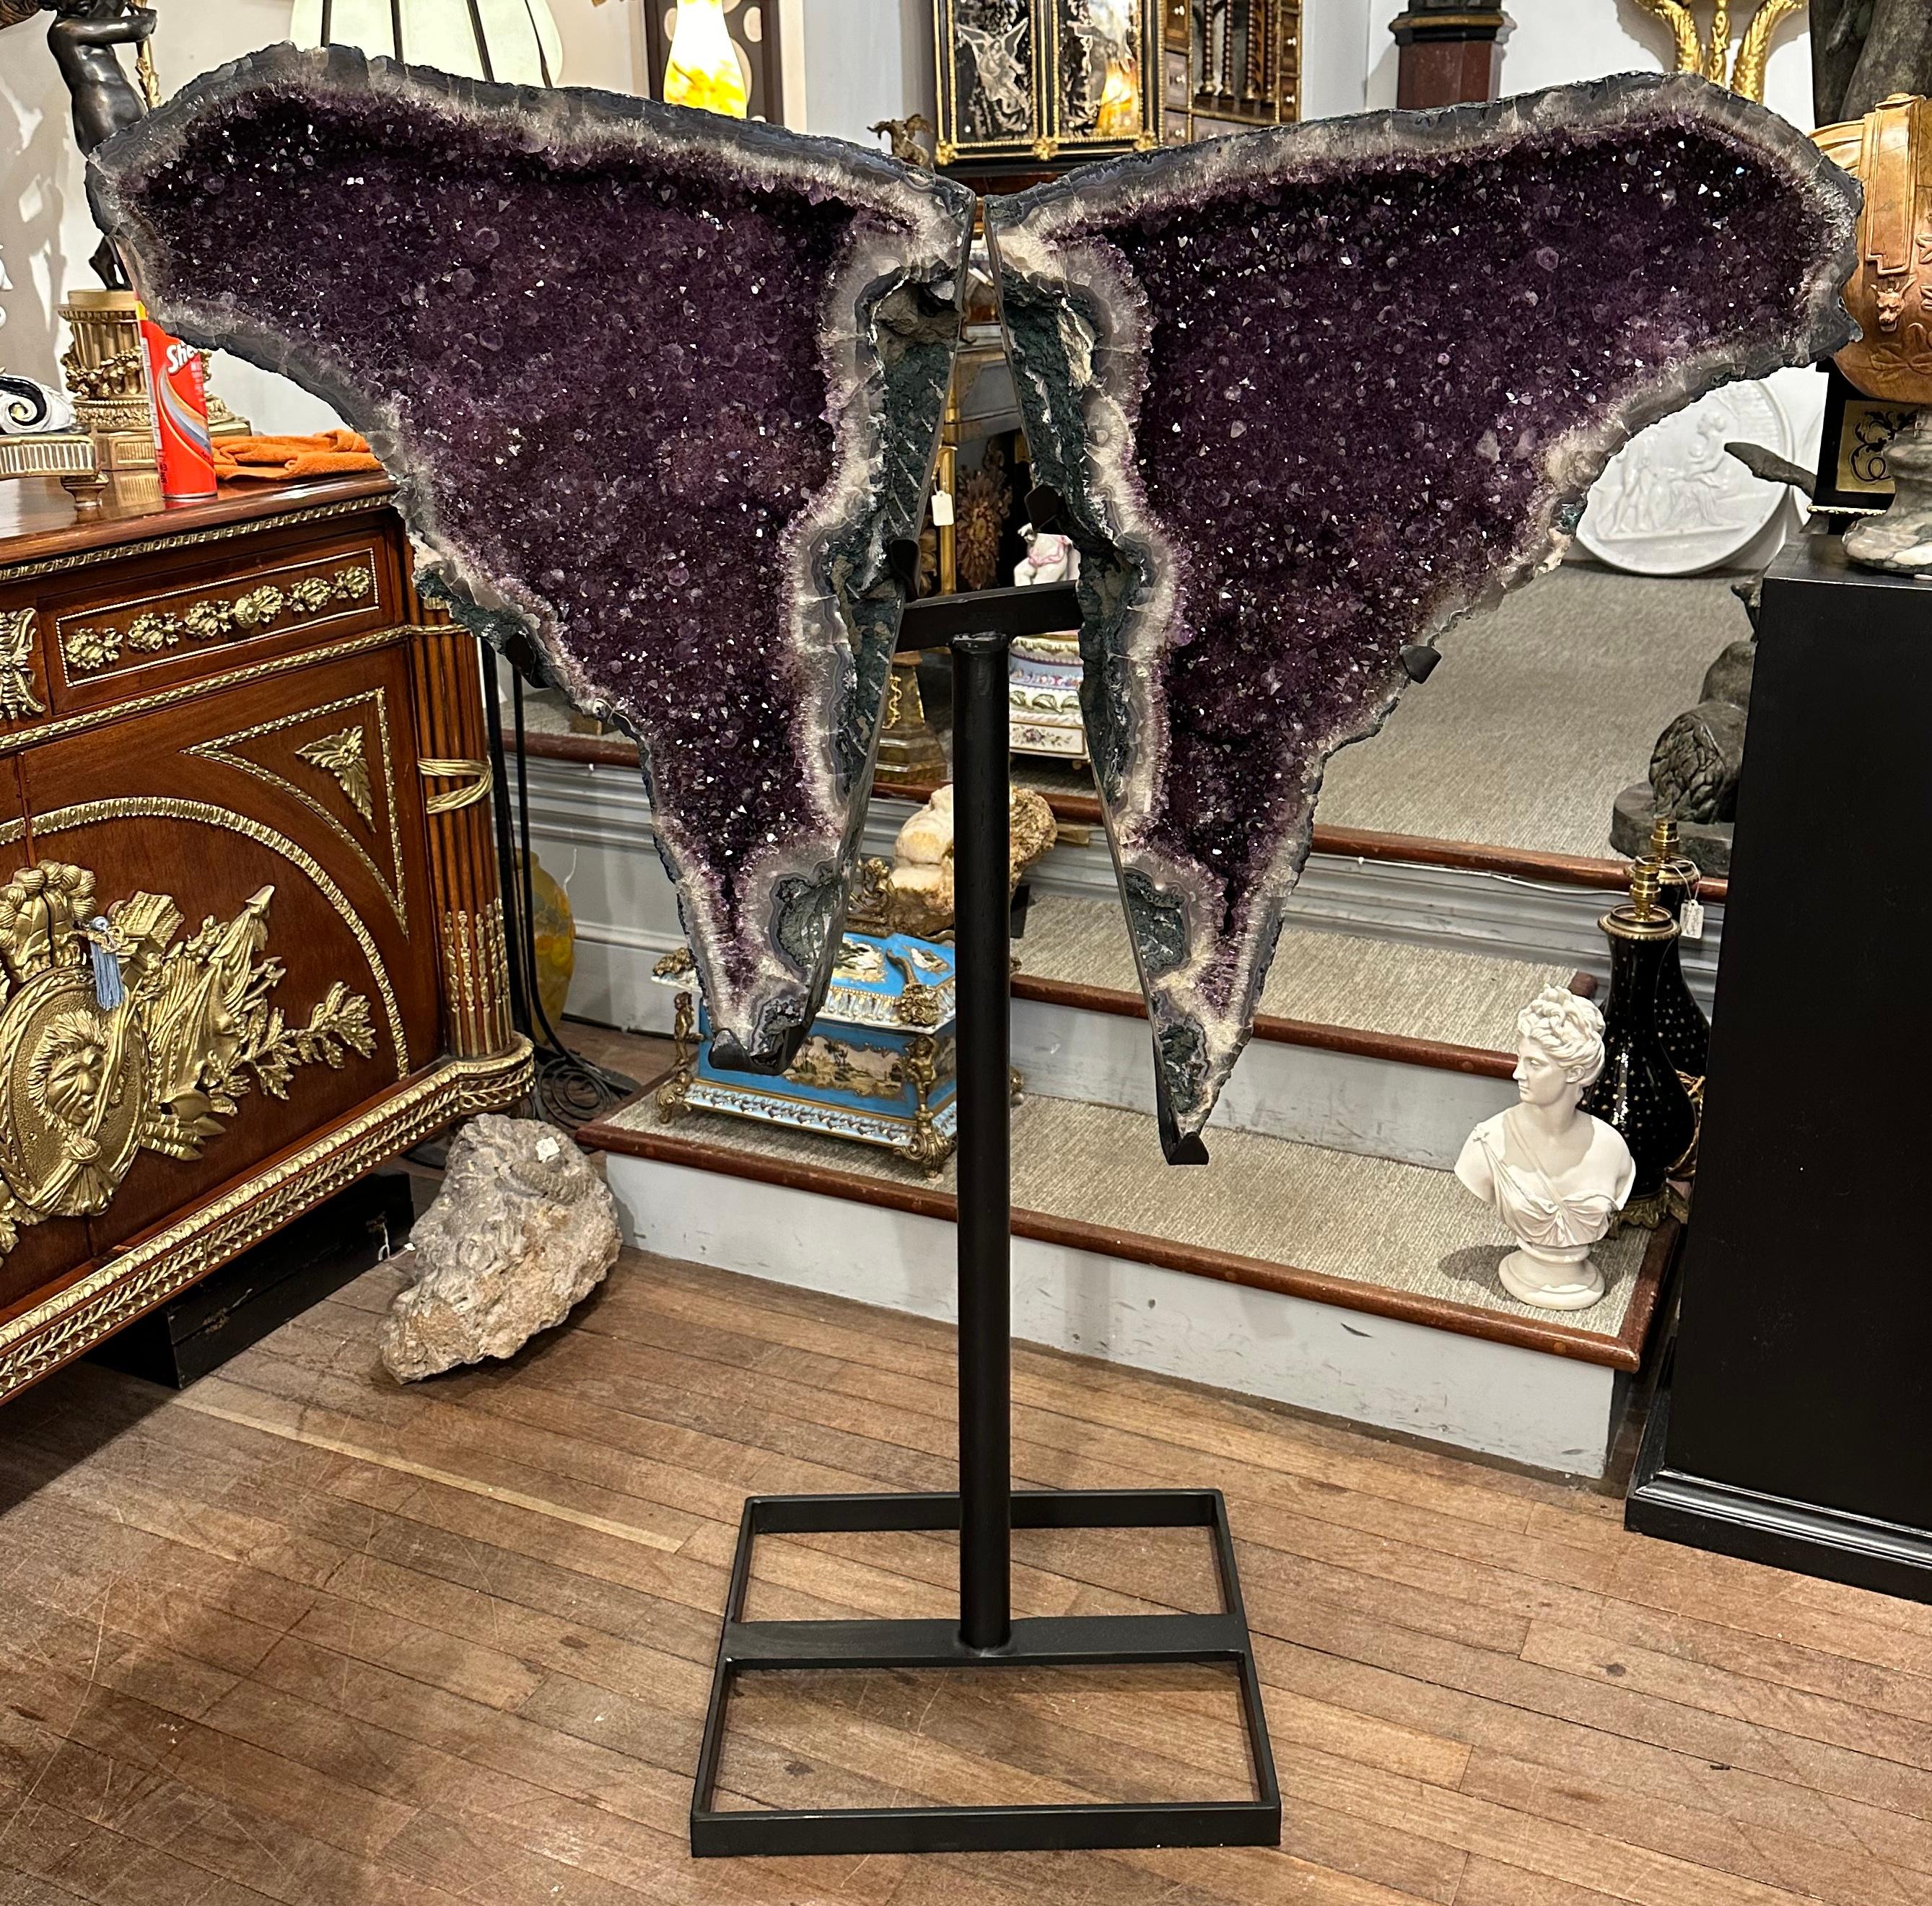 A large, rare and stunning natural pair of amethyst elephant ears on a black metal stand. This is a spectacular natural specimen, deep purple in colour. It catches the light beautifully and would be sure to be a focal point in any room. Originally